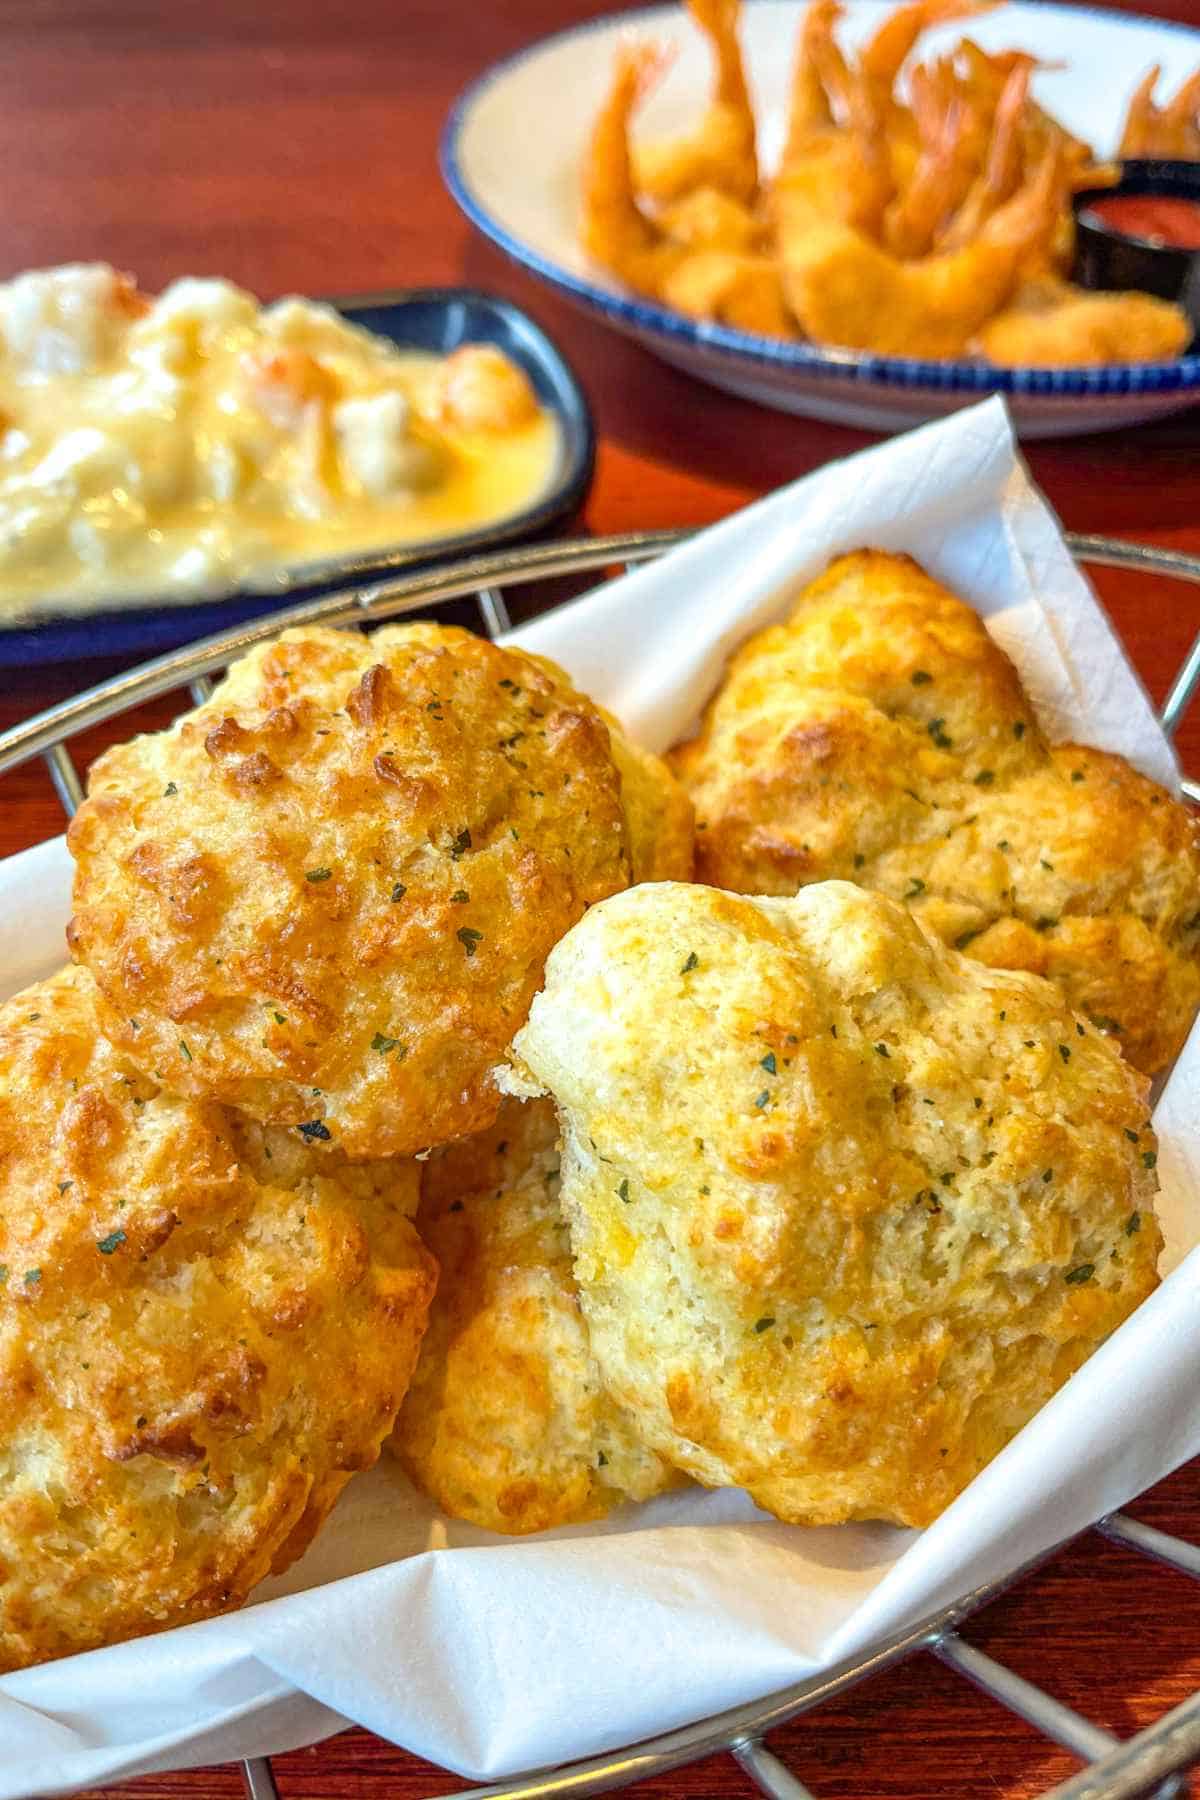 A Basket of Cheddar Biscuits.